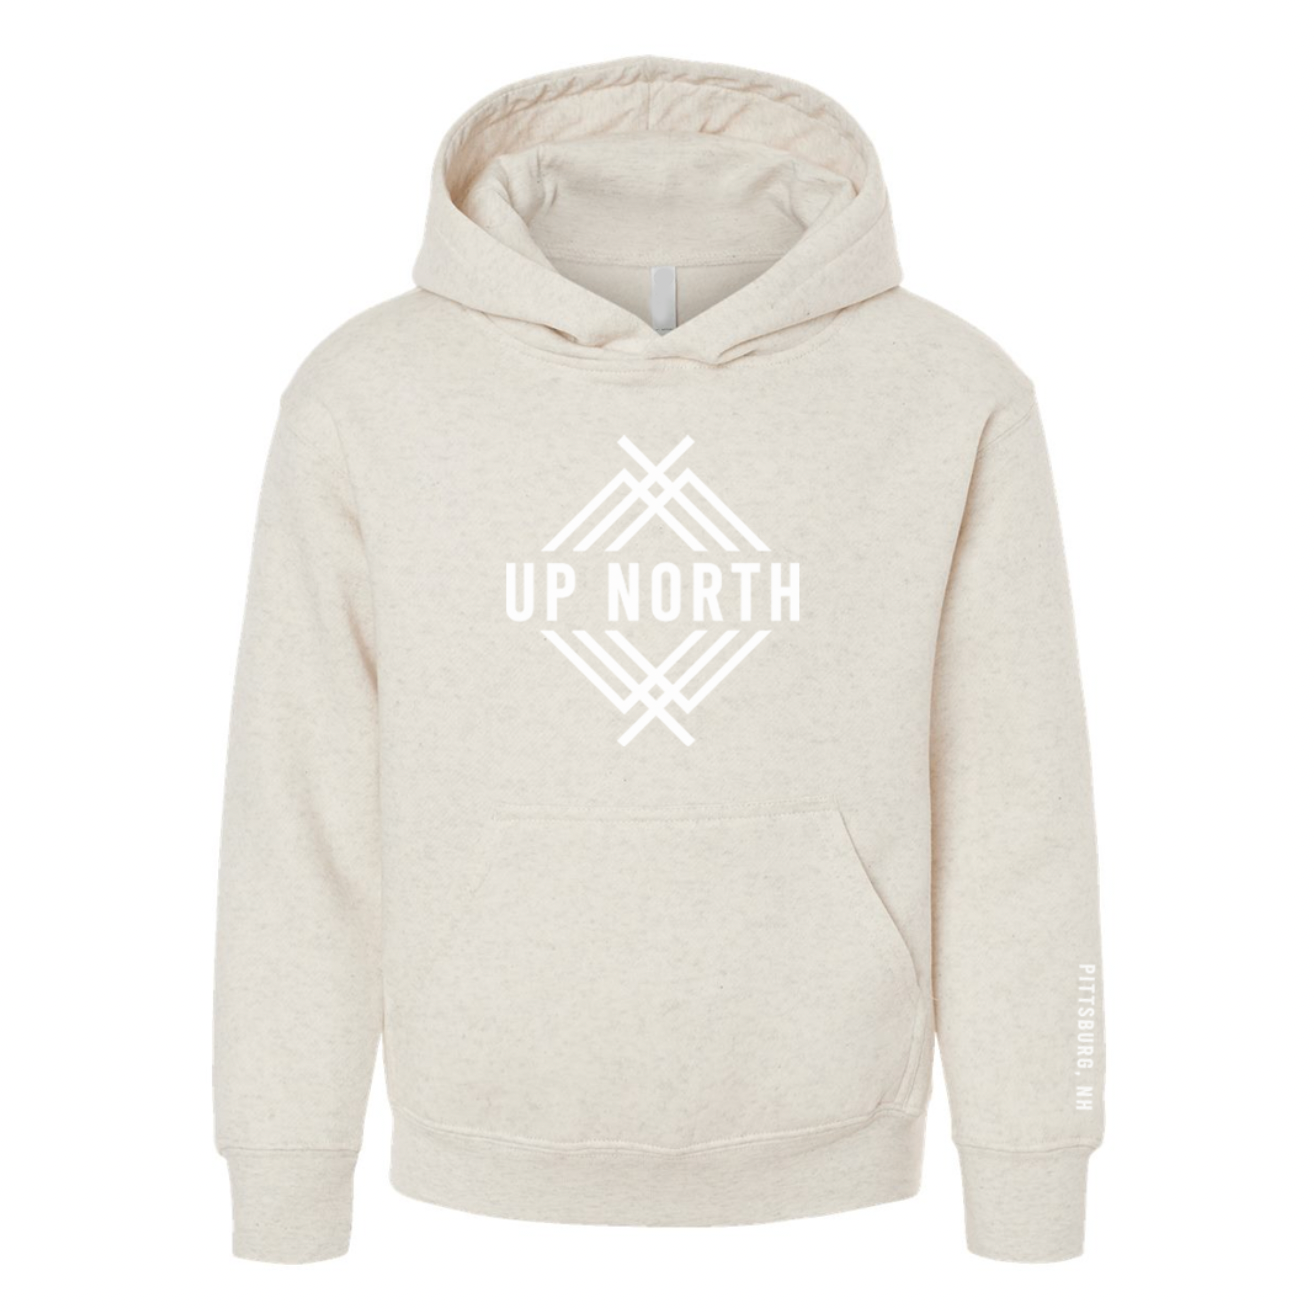 Up North Youth Logo Hoodie - Ivory Heather